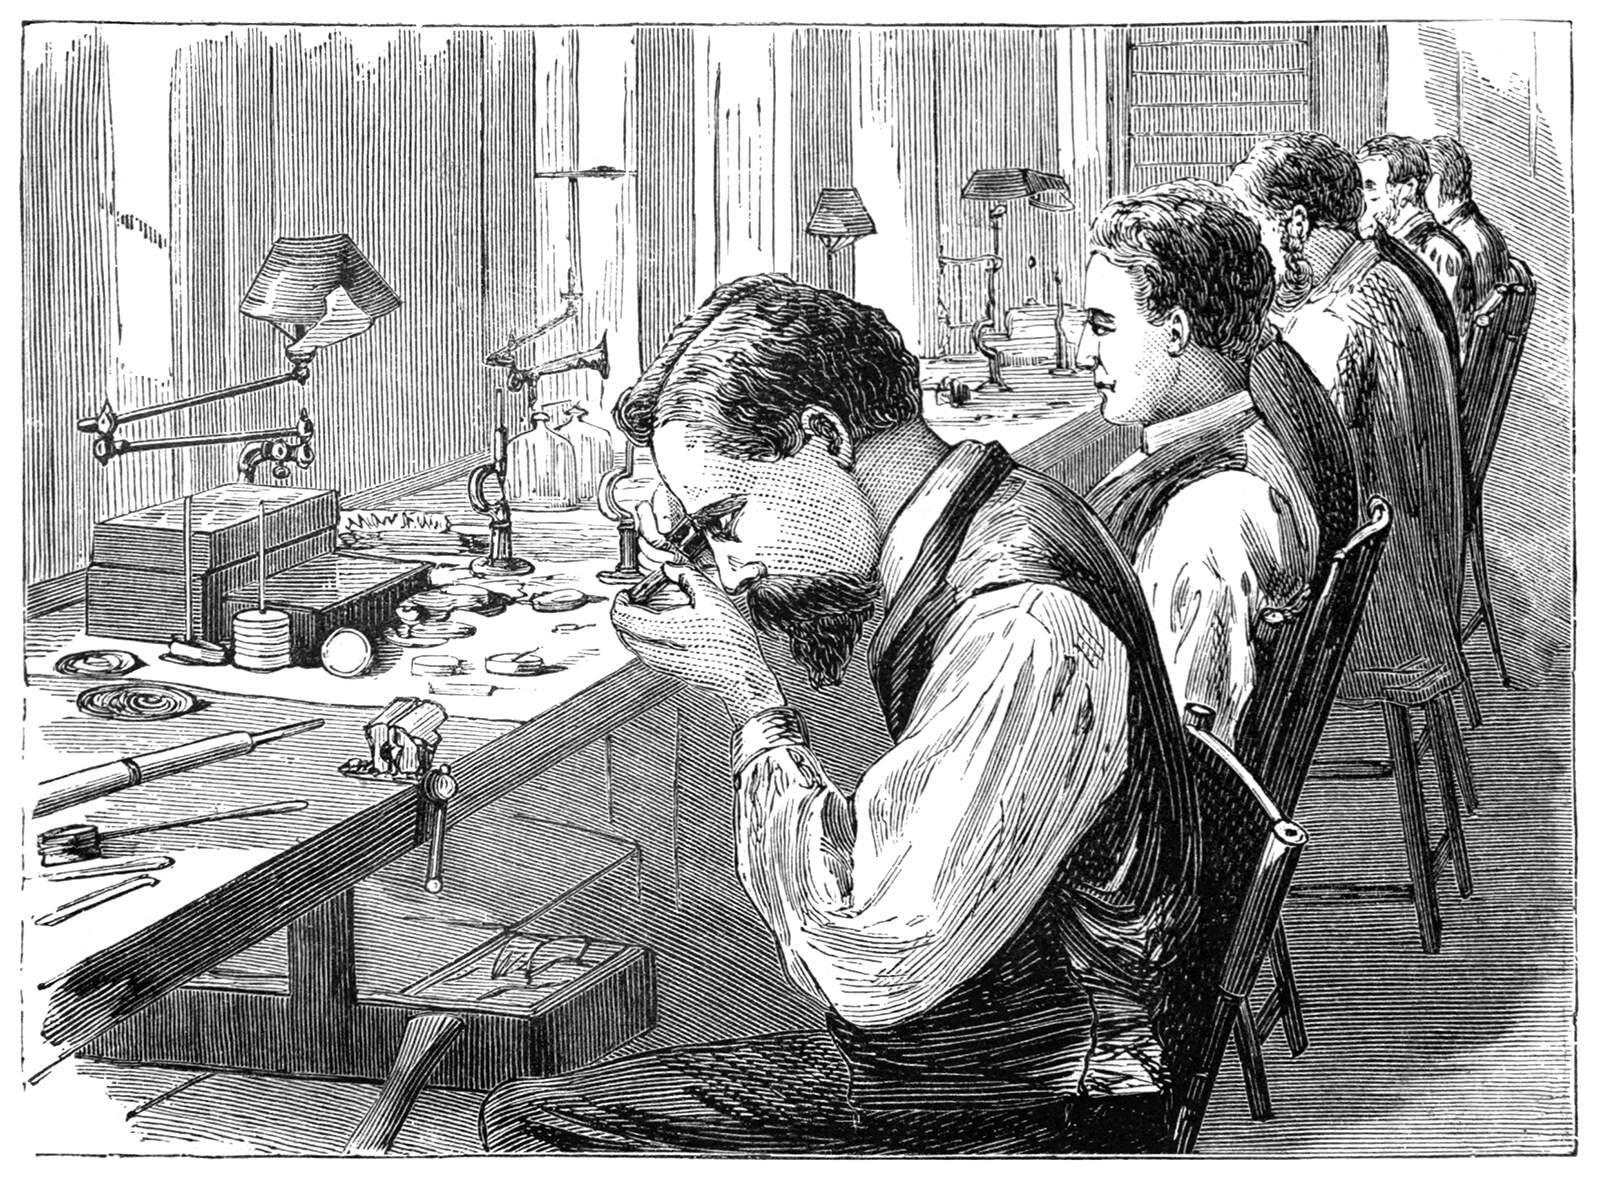 An illustration of a man looking at a watch being built